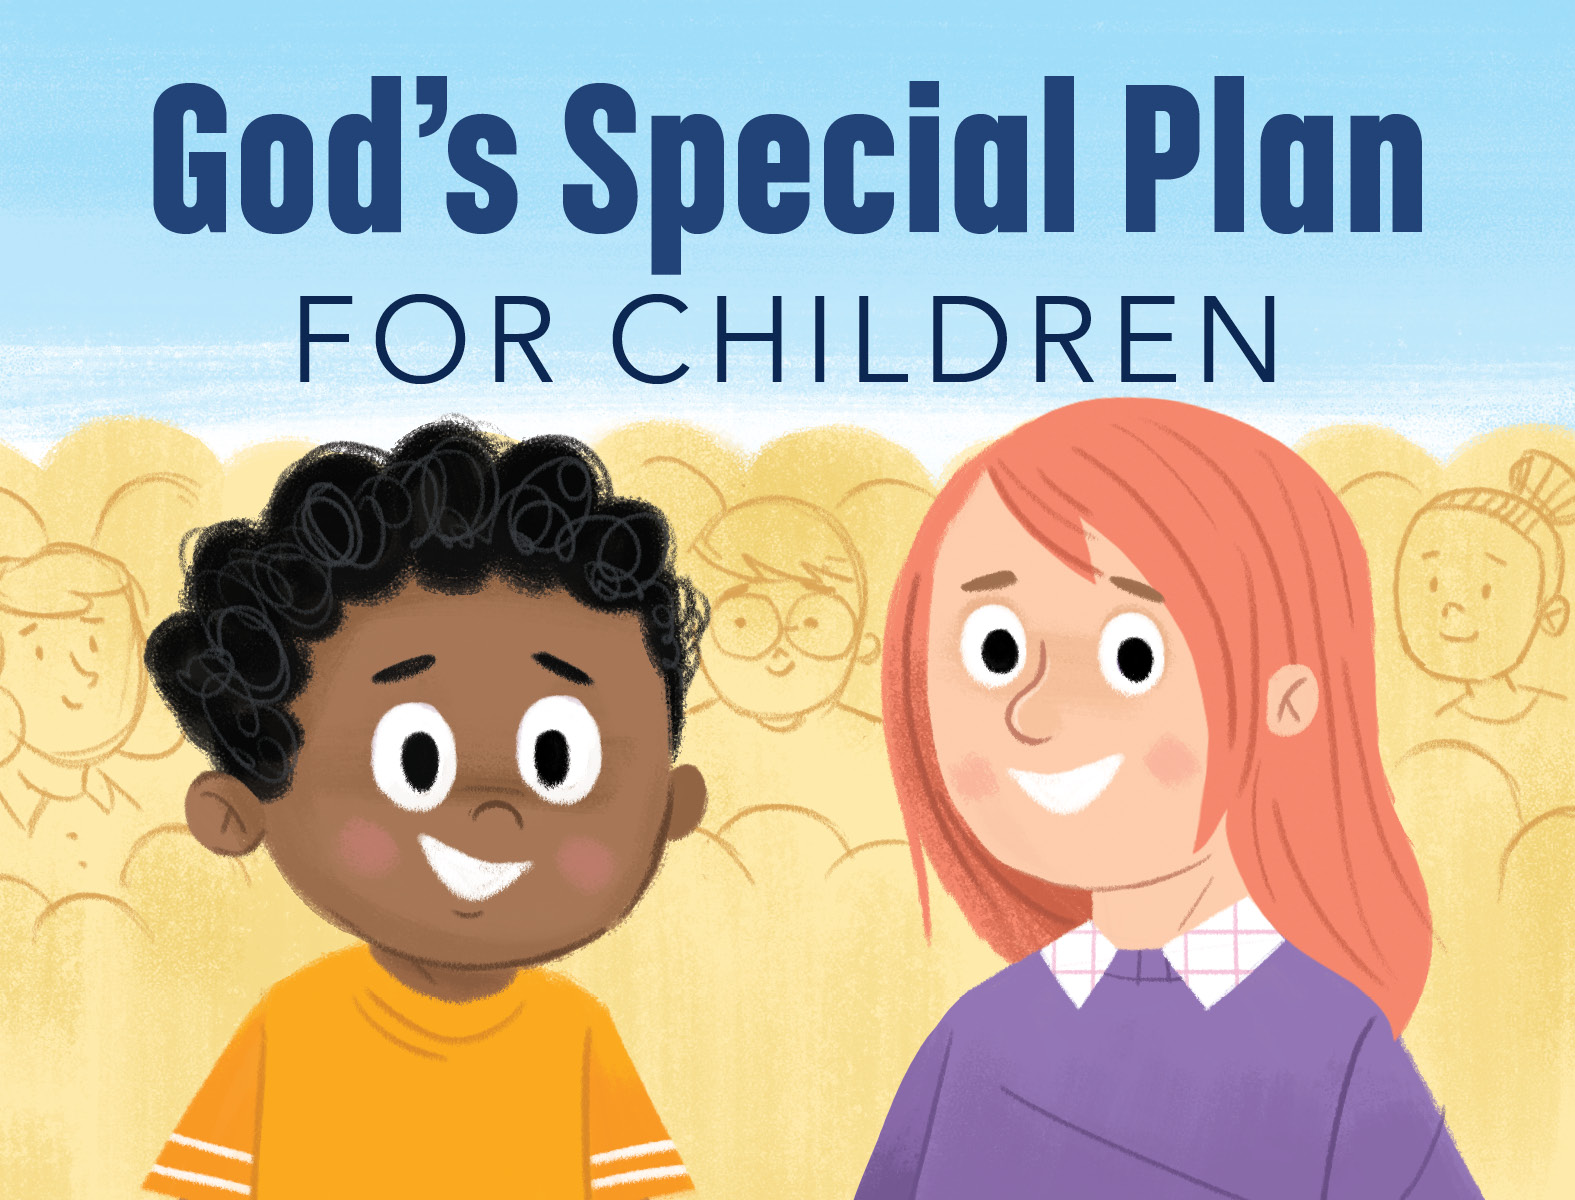 God's Special Plan for Children - North American Mission Board